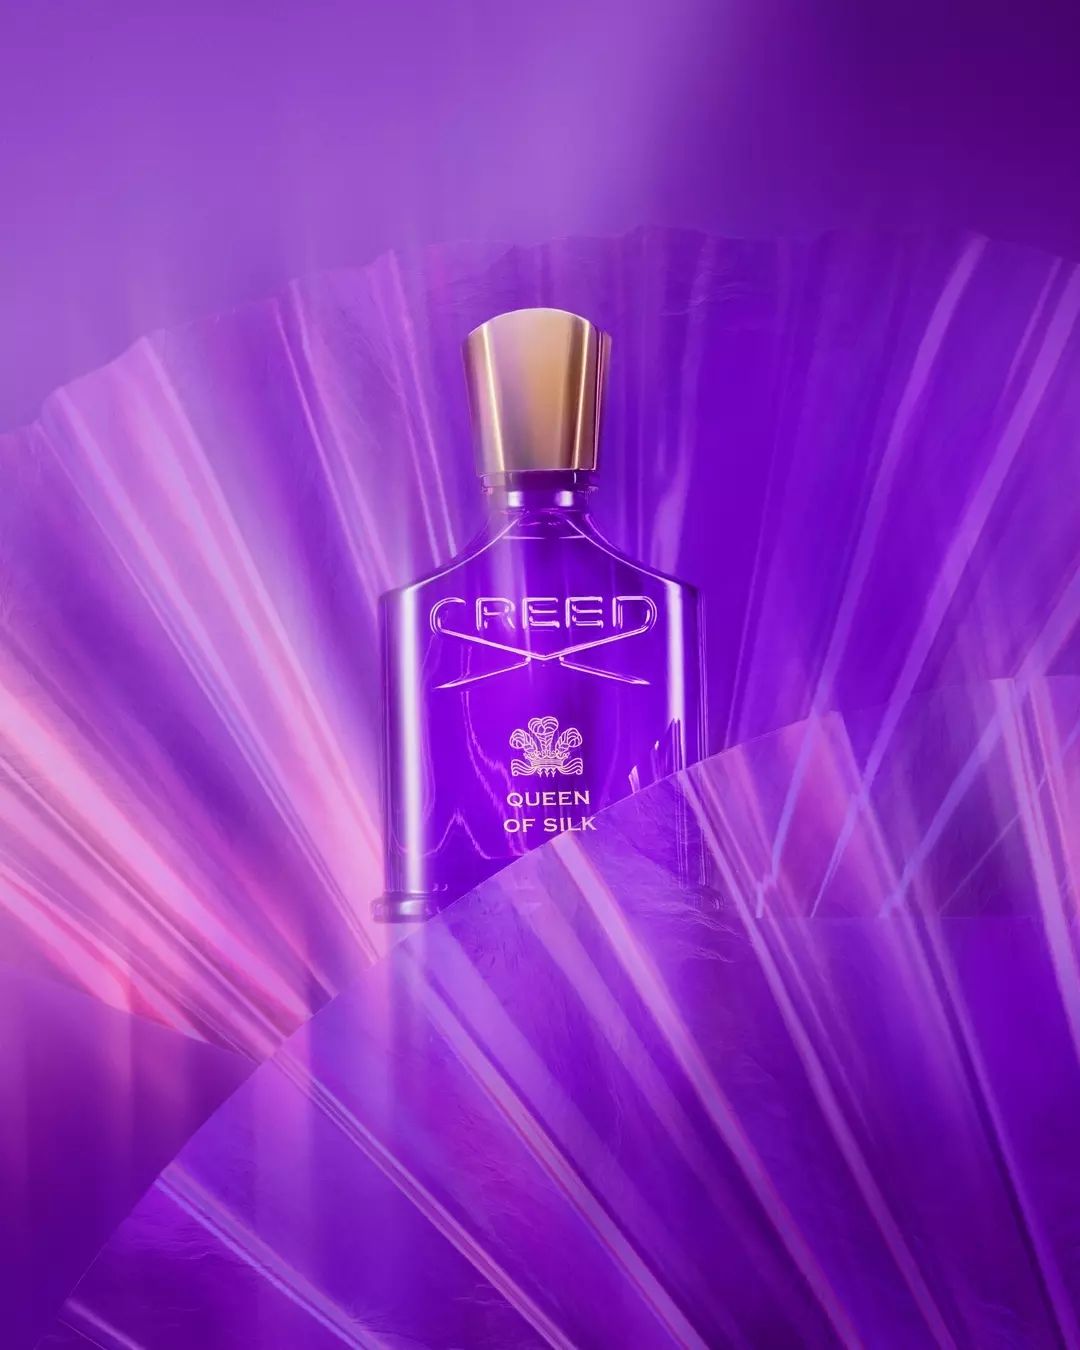 New Creed Fragrance: Queen of Silk